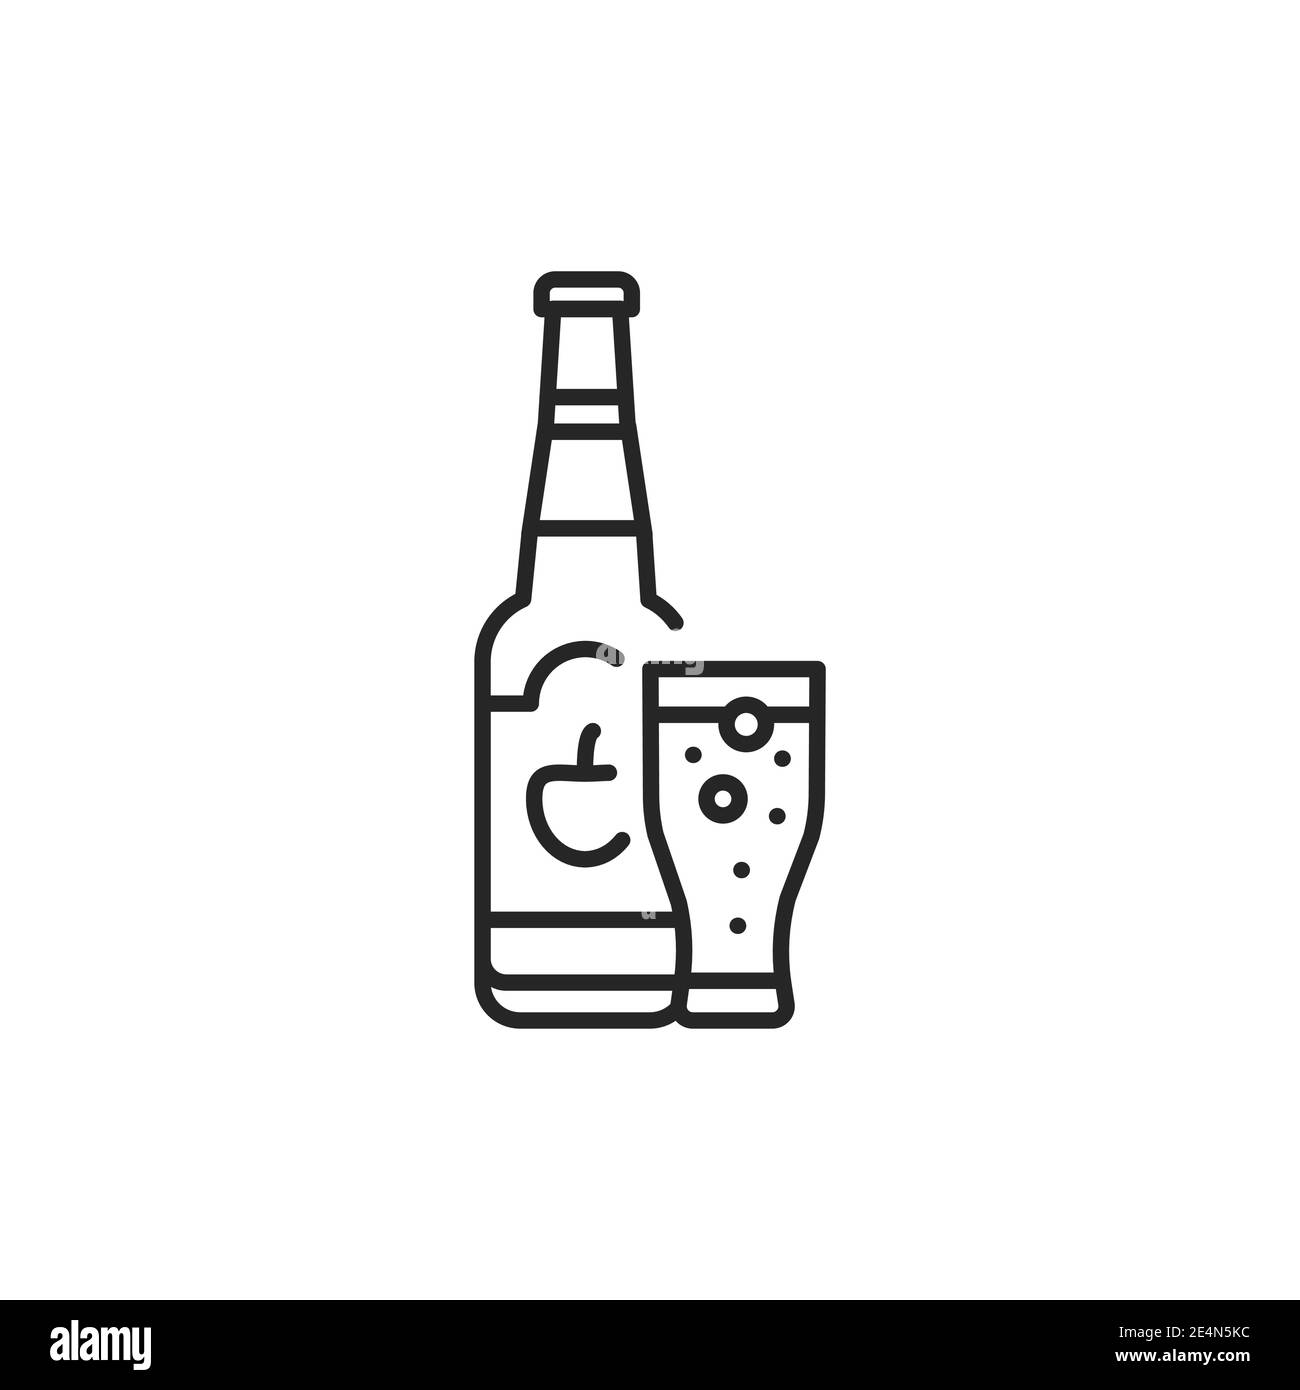 Cider bottle and glass color line icon. Alcoholic beverages. Stock Vector